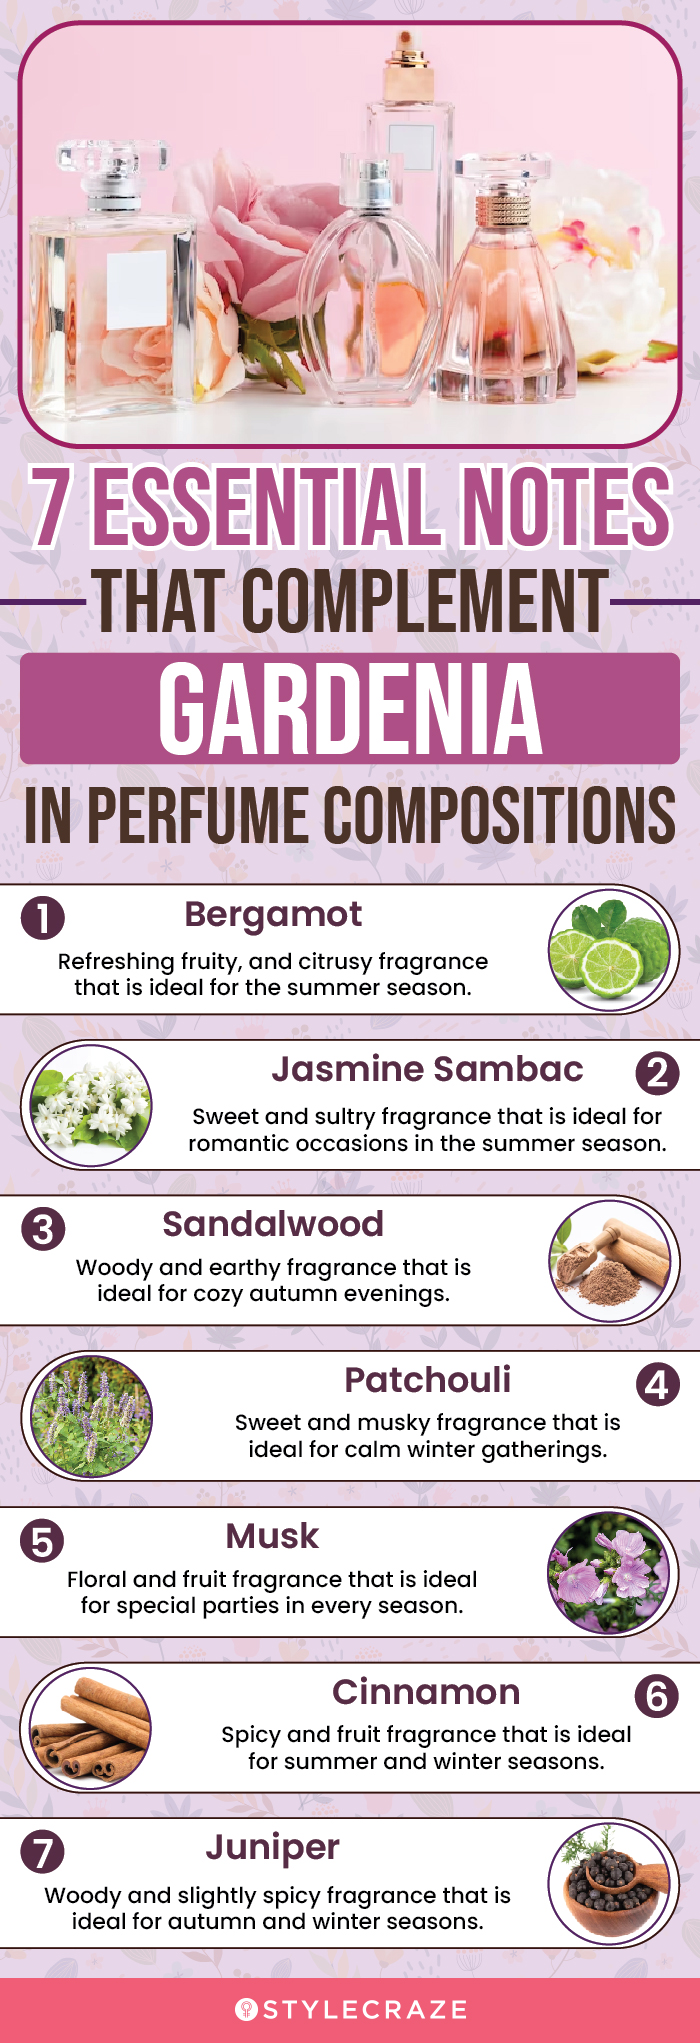  7 Essential Notes That Complement Gardenia In Perfume Compositions (infographic)